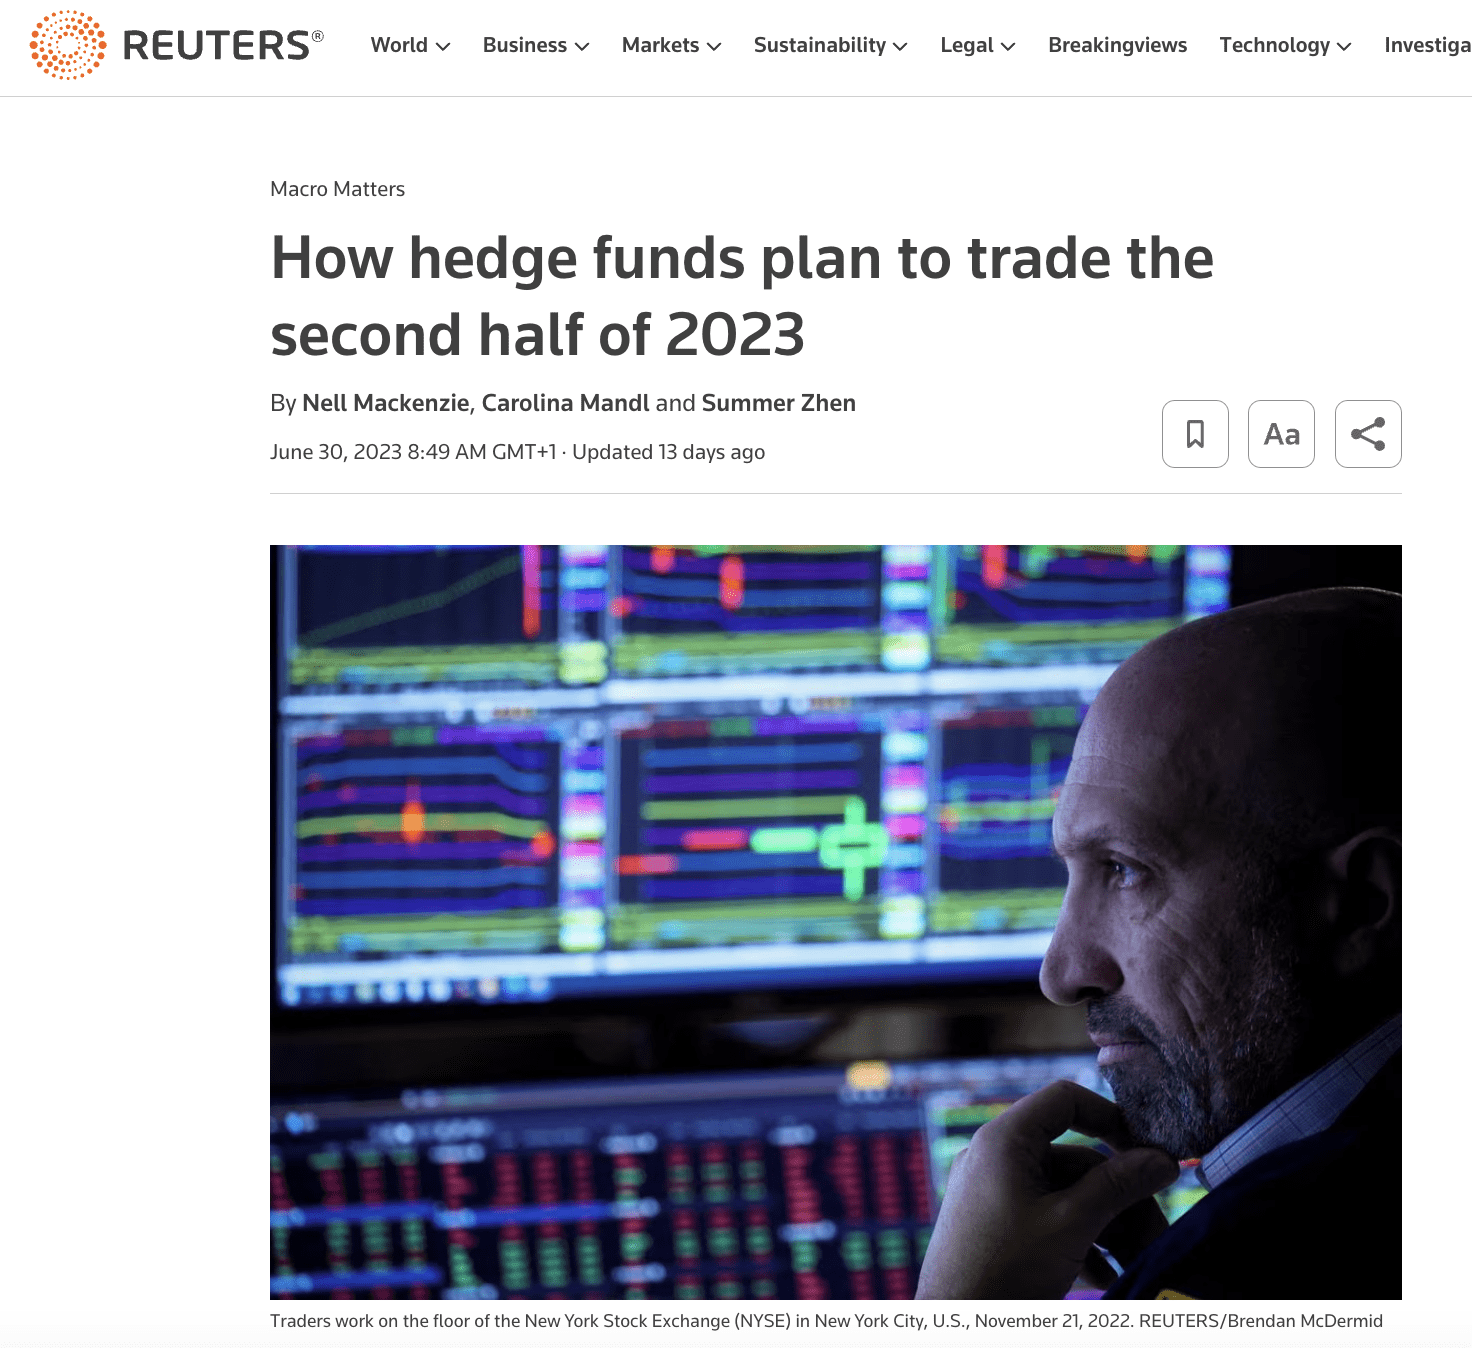 Reuters: ‘How hedge funds plan to trade the second half of 2023’